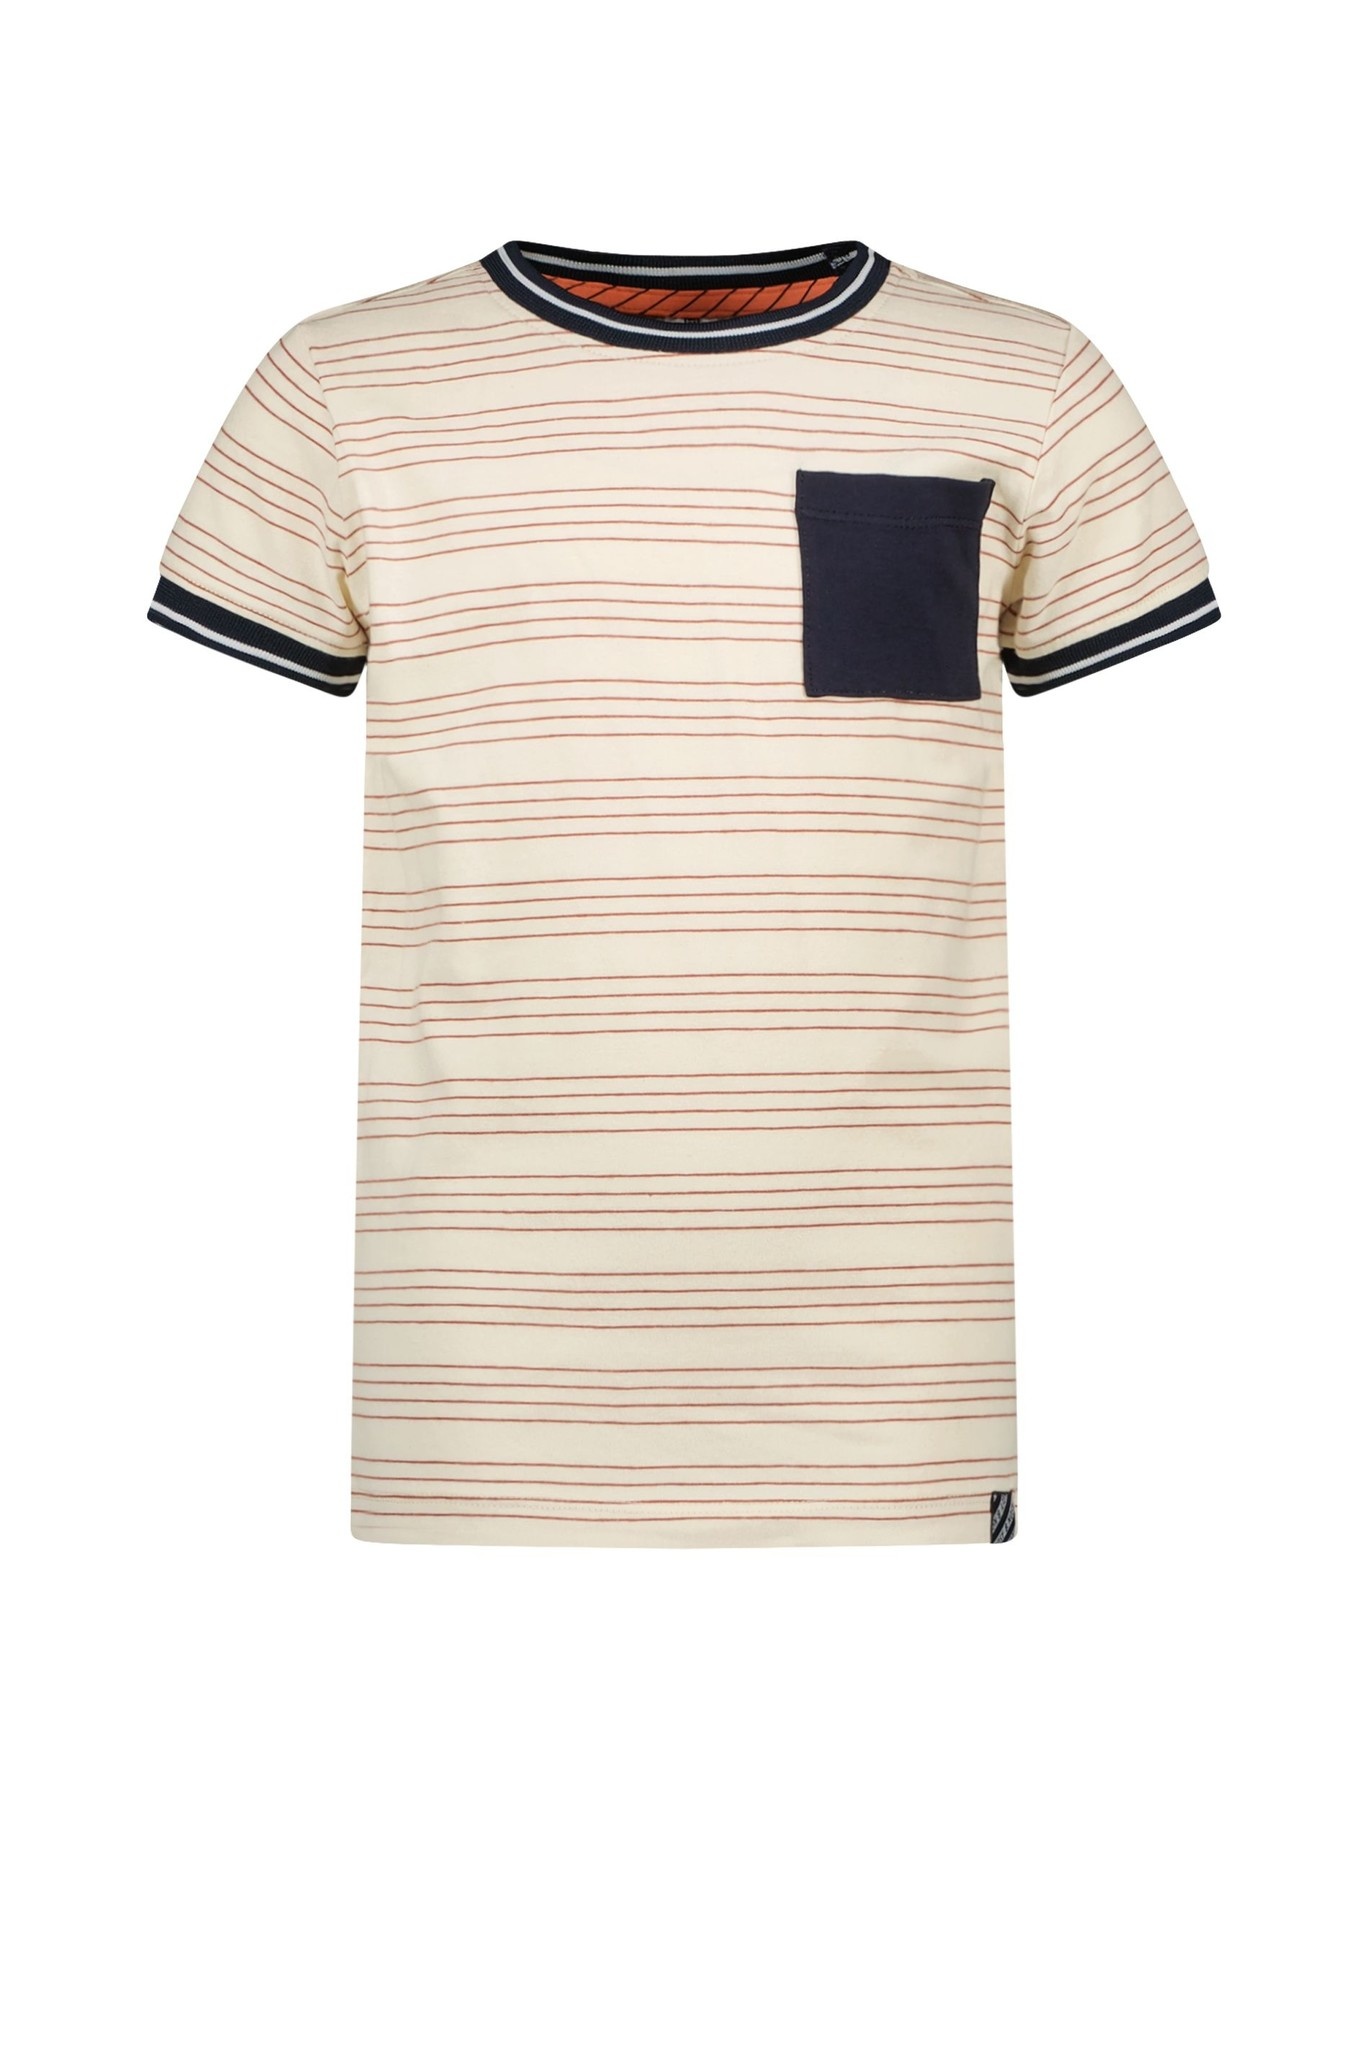 B.Nosy-Boys YDS t-shirt with patched pocket on chest-musician stripe